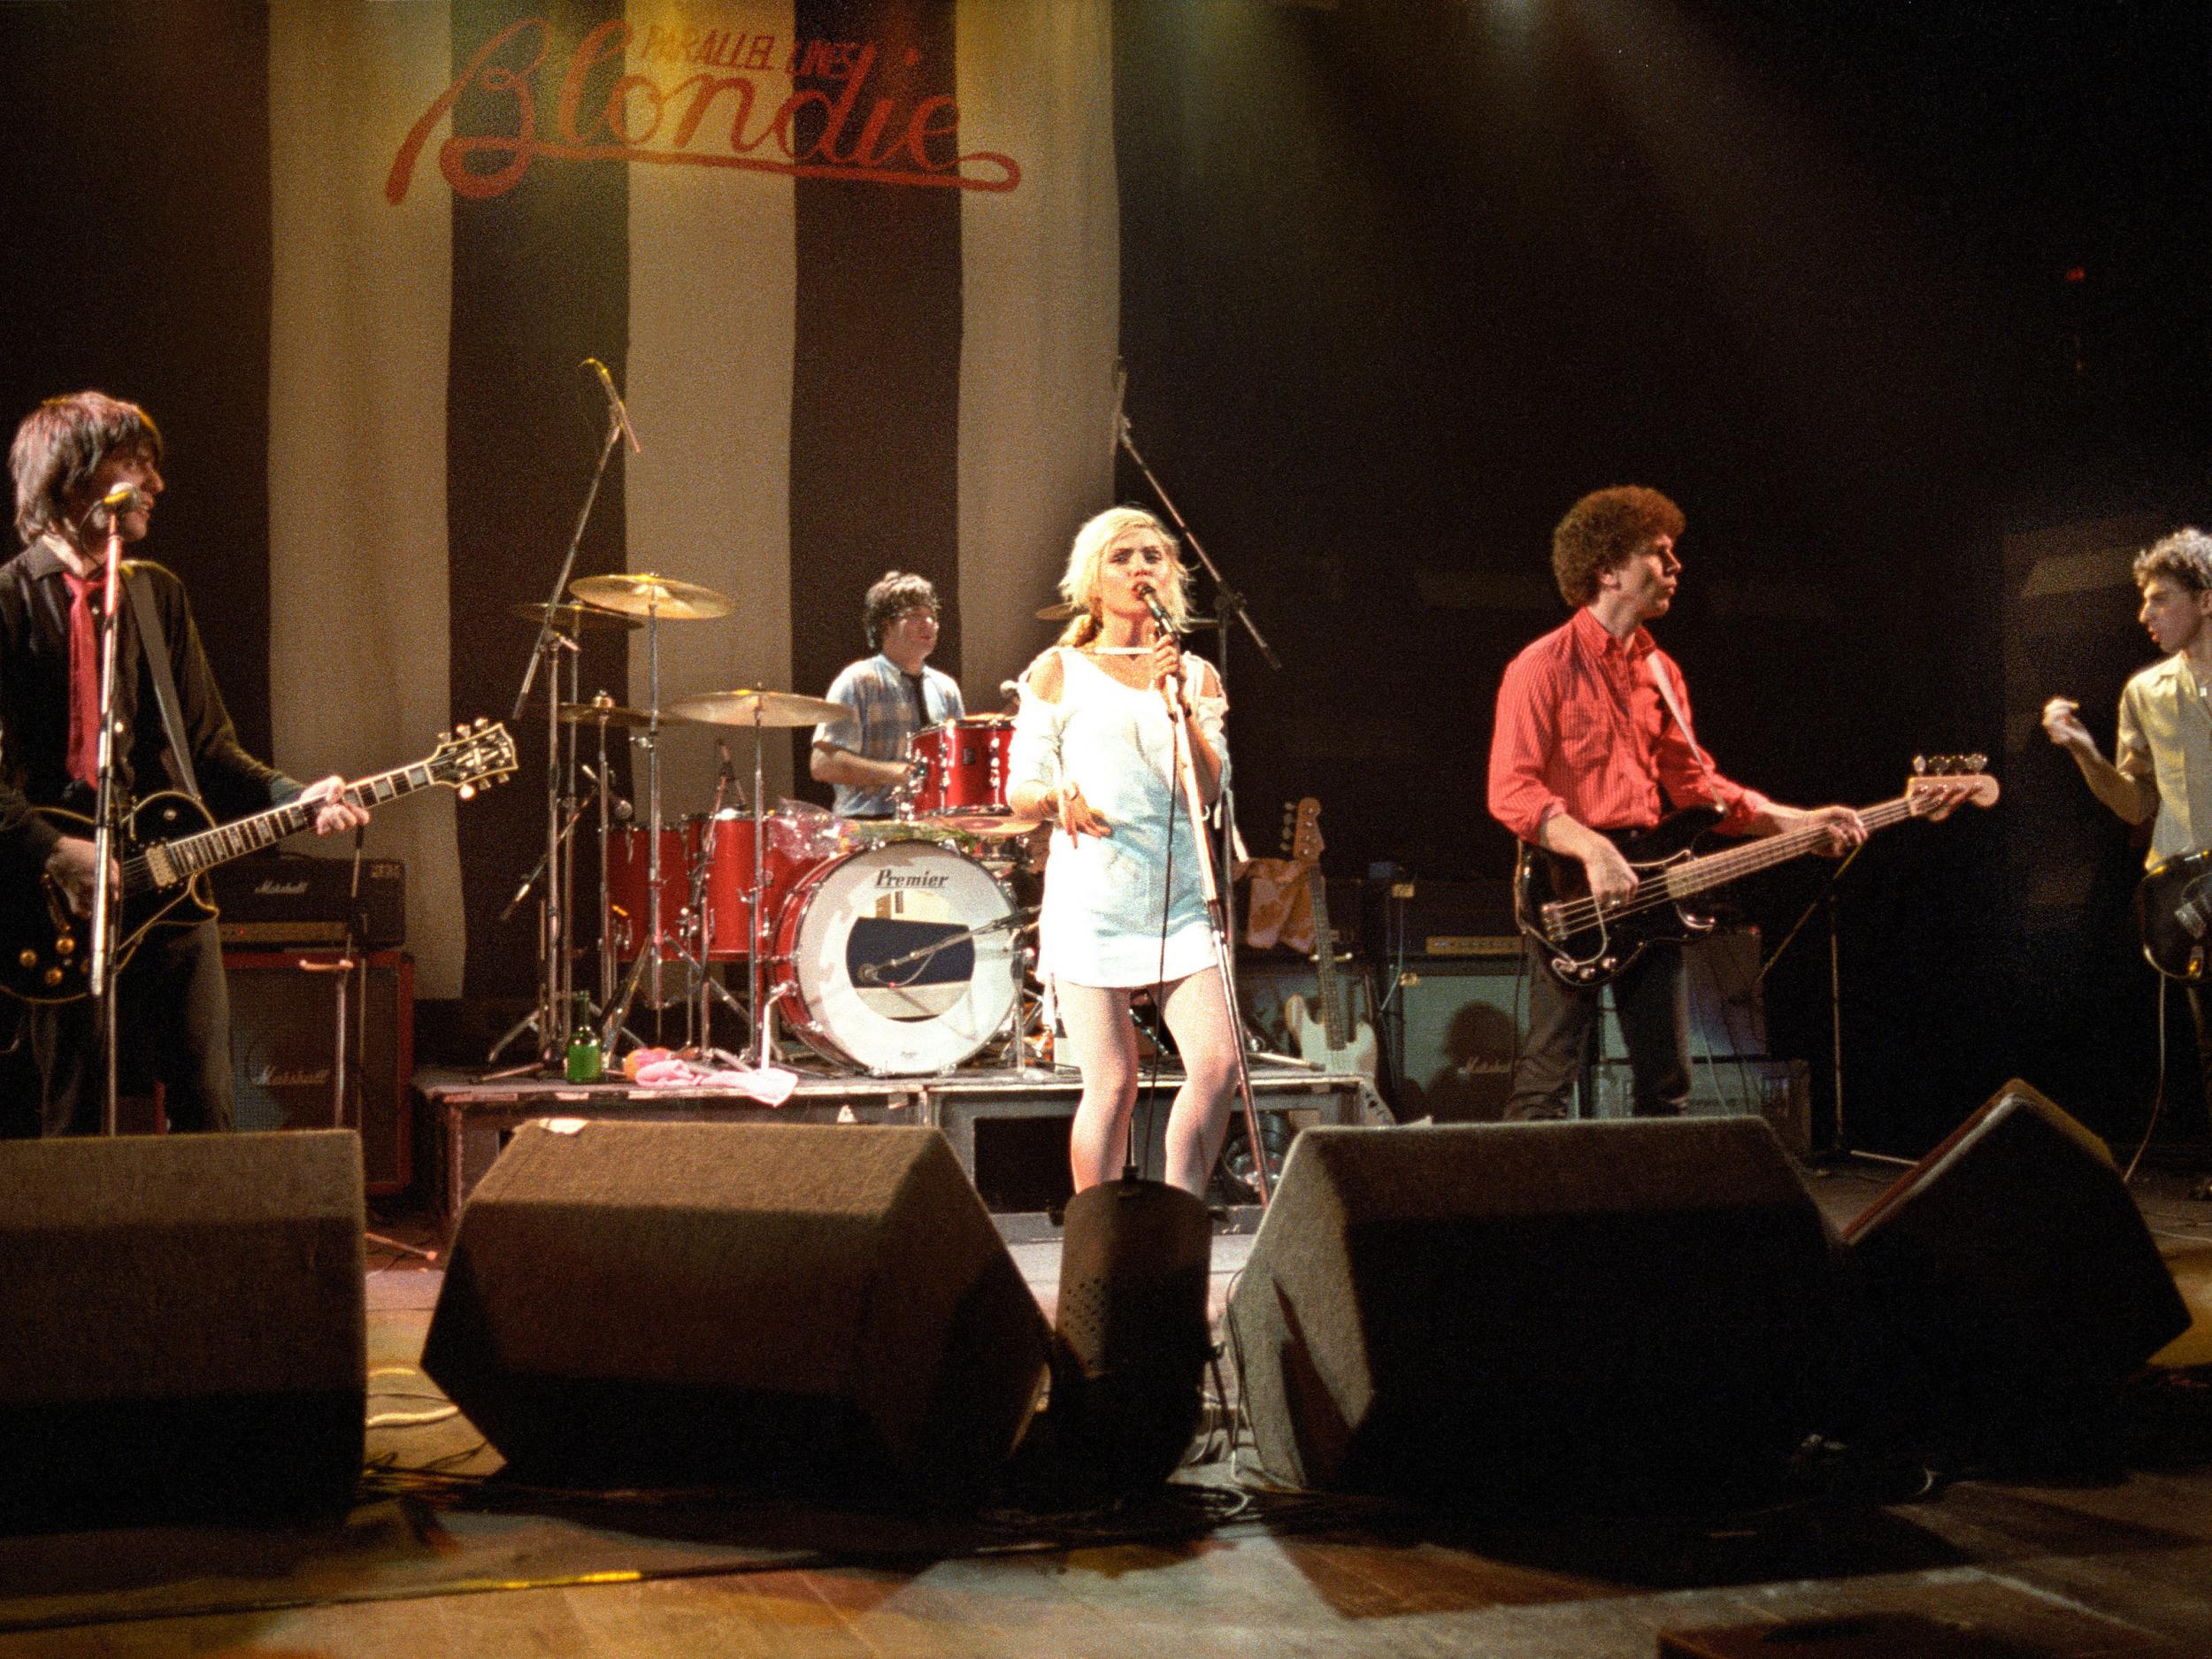 Blondie offered the world pristine pop perfection, with an album that led to worldwide domination